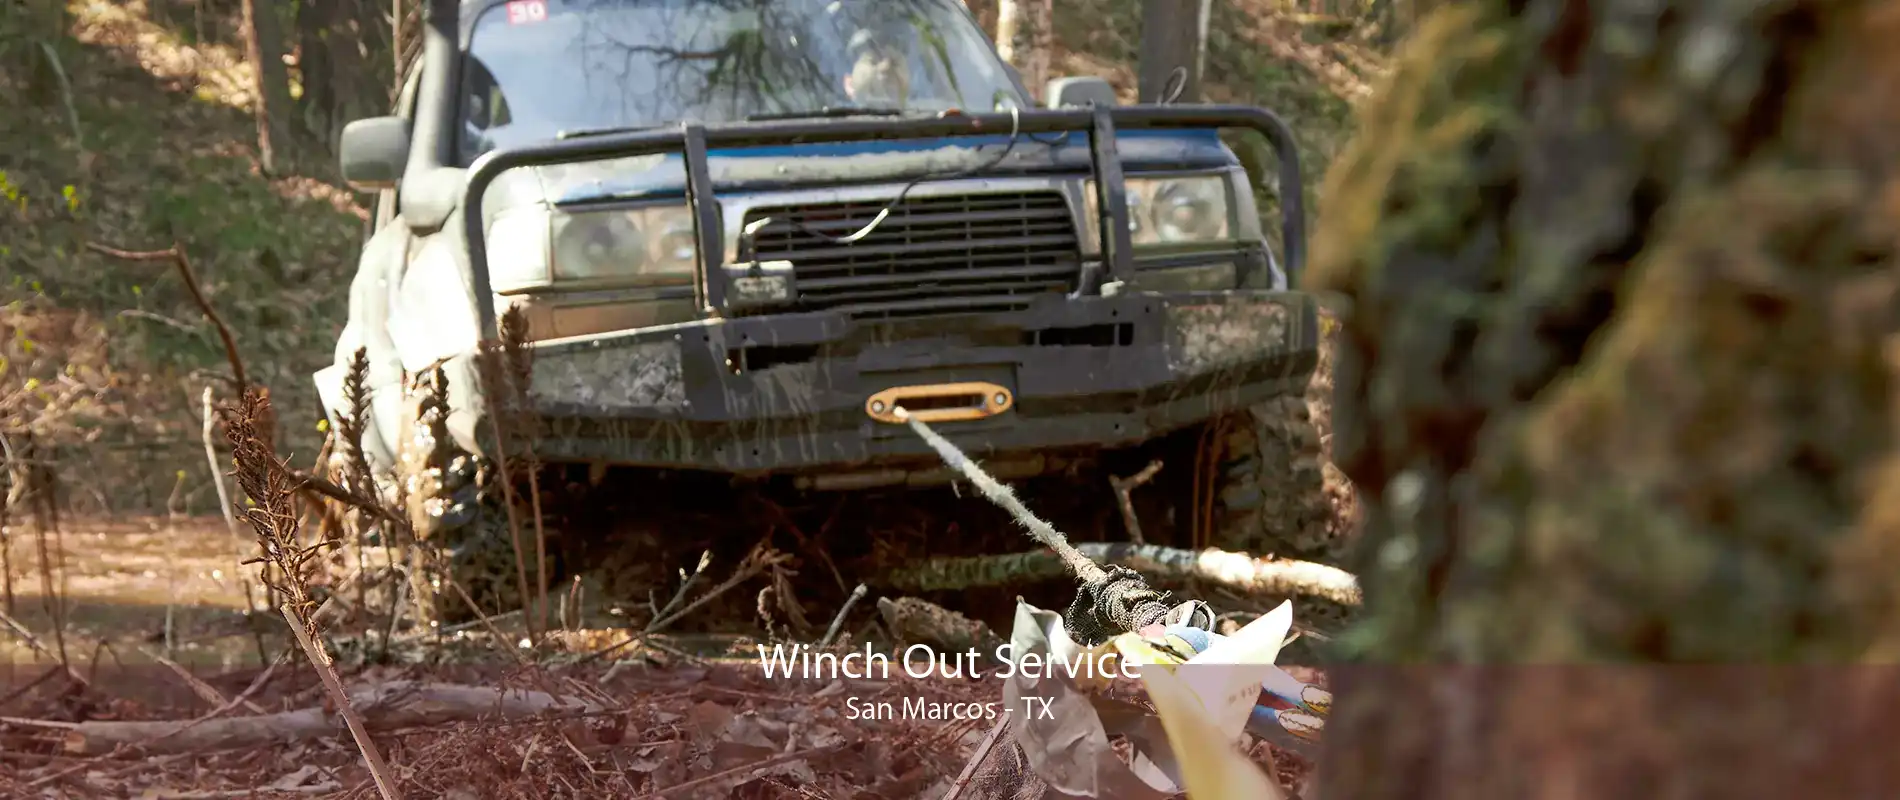 Winch Out Service San Marcos - TX